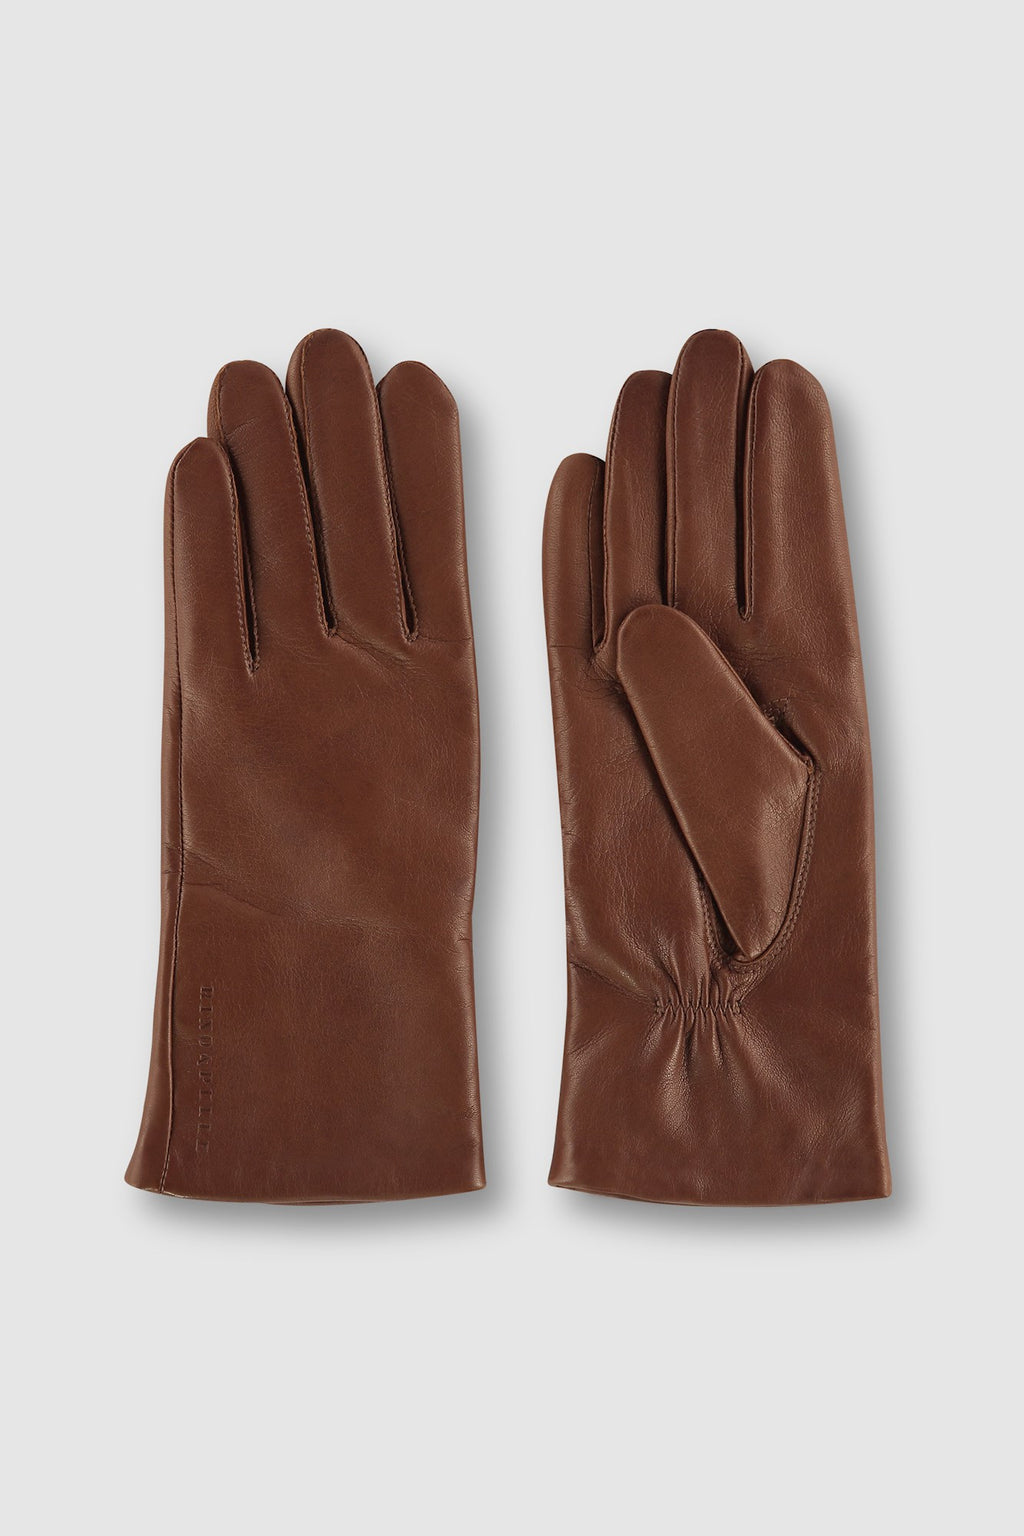 Rino & Pelle Gloves ANNICA Soft Lamb Leather Lined Cognac